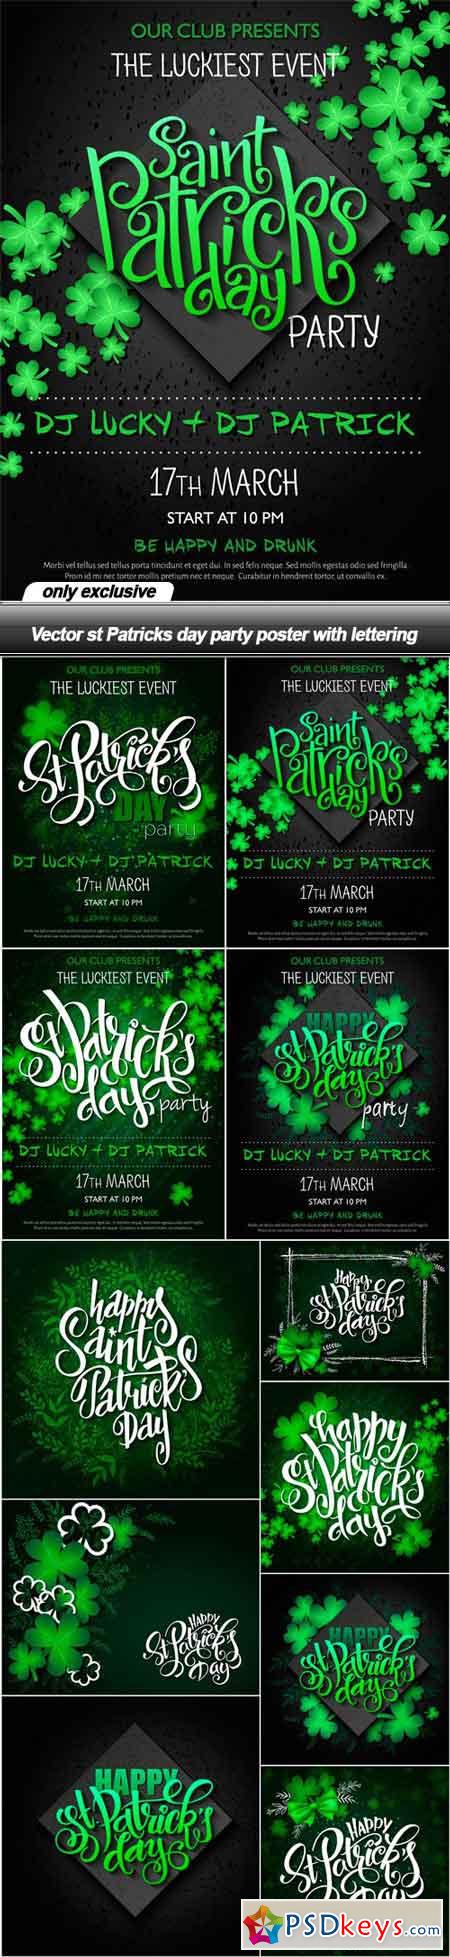 Vector st Patricks day party poster with lettering - 11 EPS